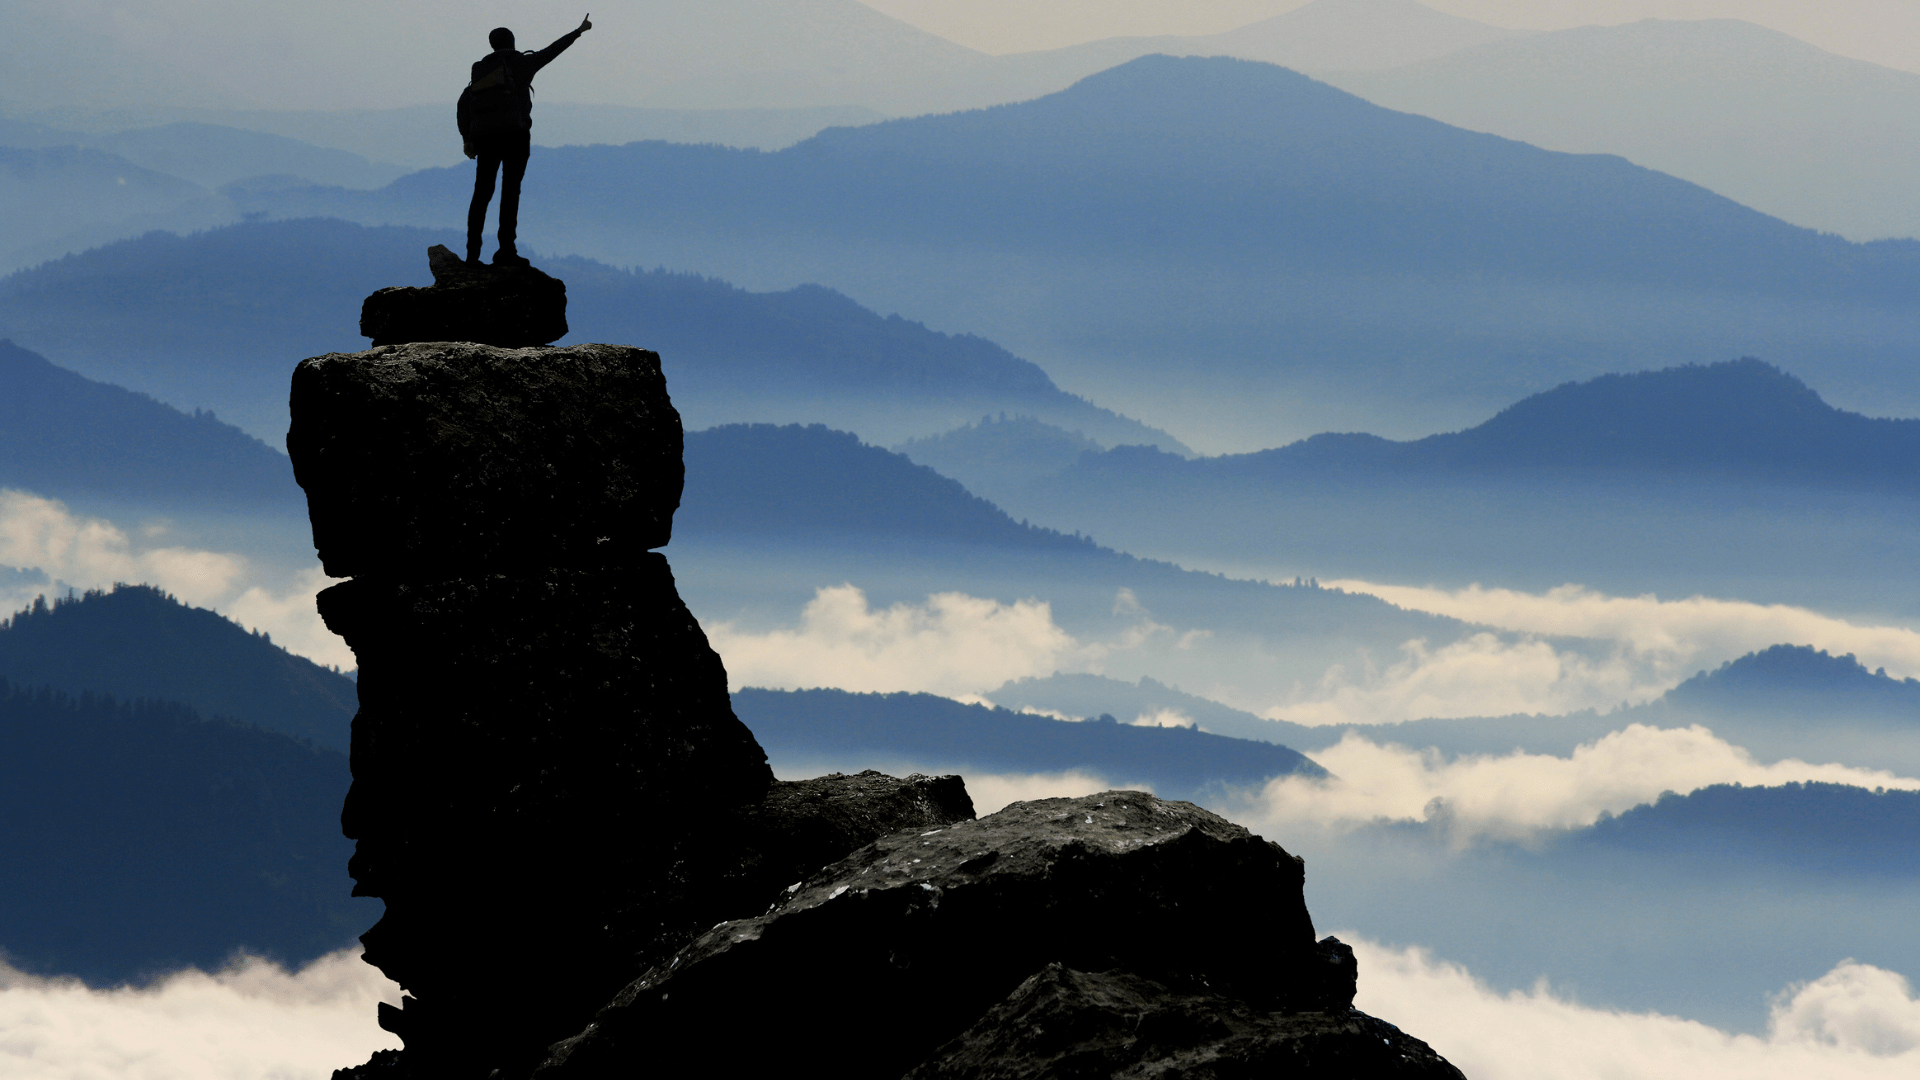 A man celebrating his success at the top of mountain.